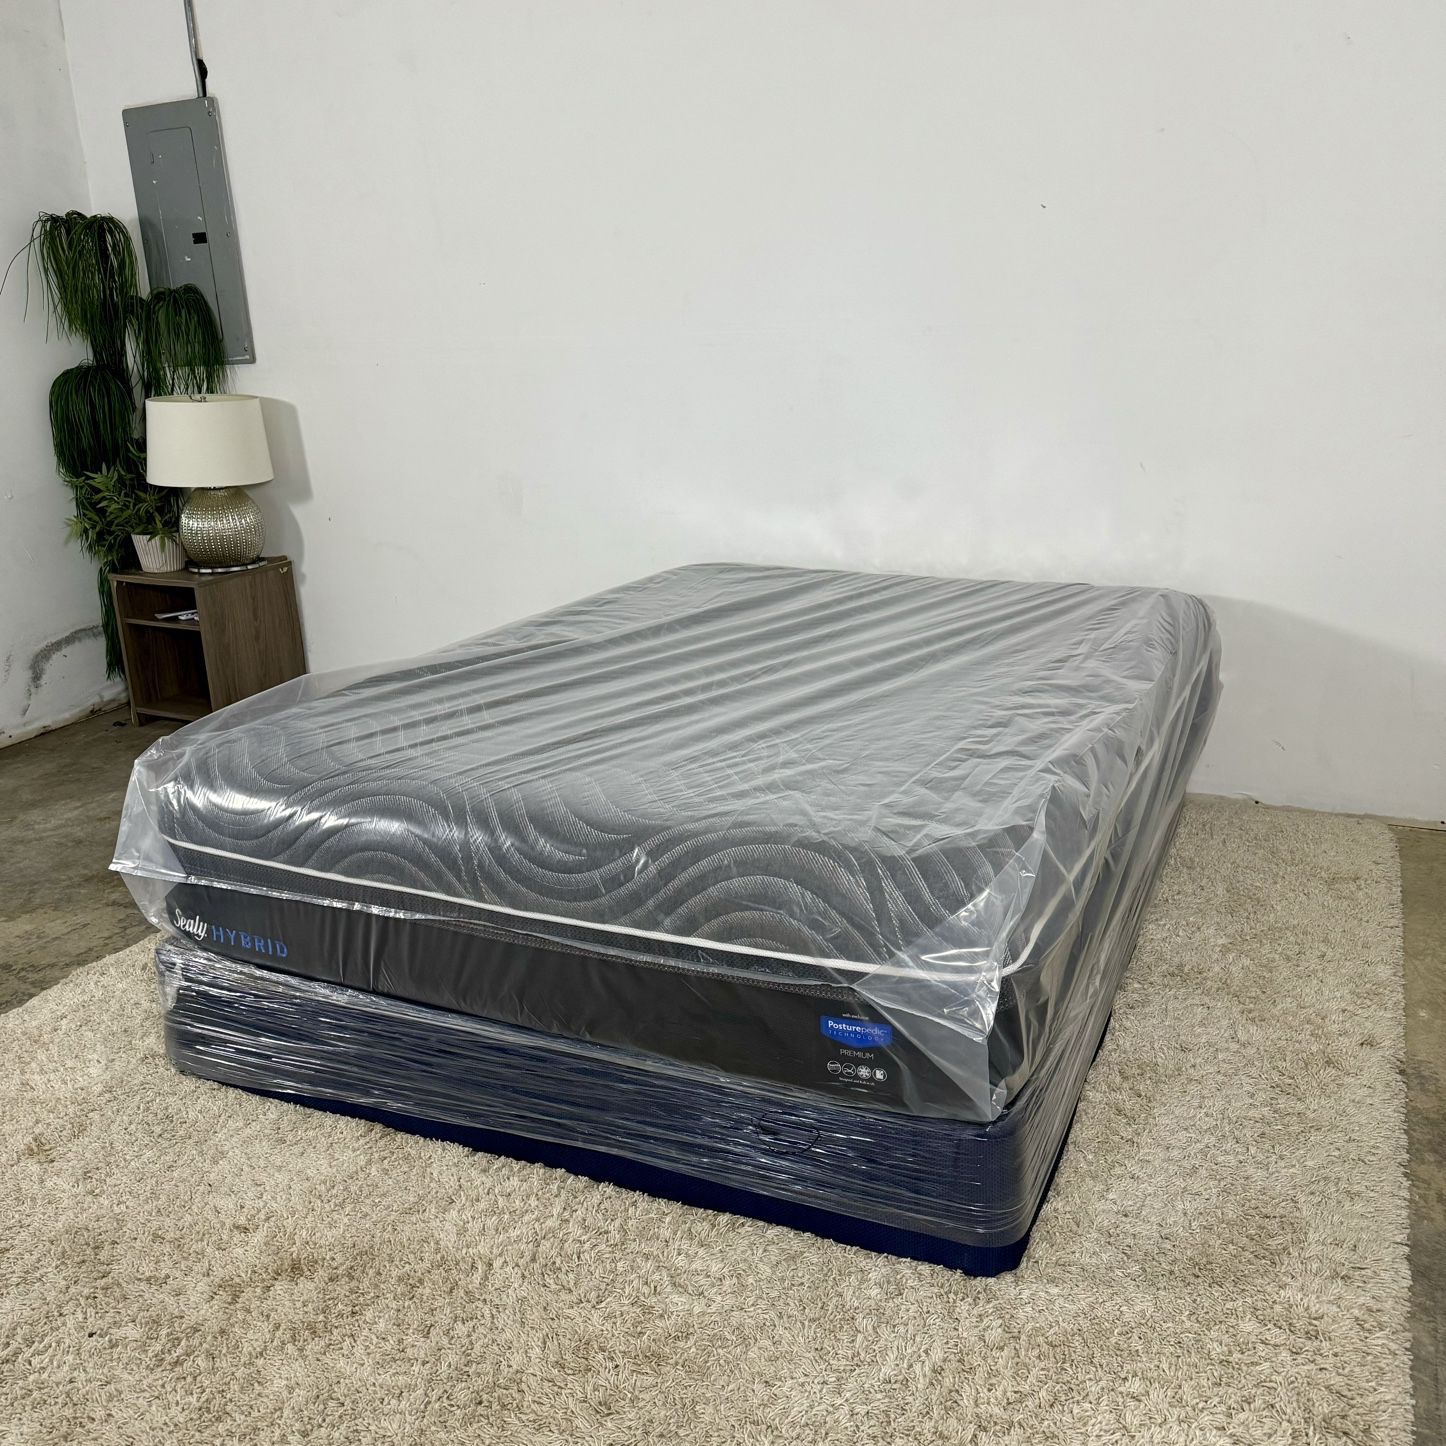 Queen Sealy Posturepedic Hybrid Mattress (Delivery Is Available)